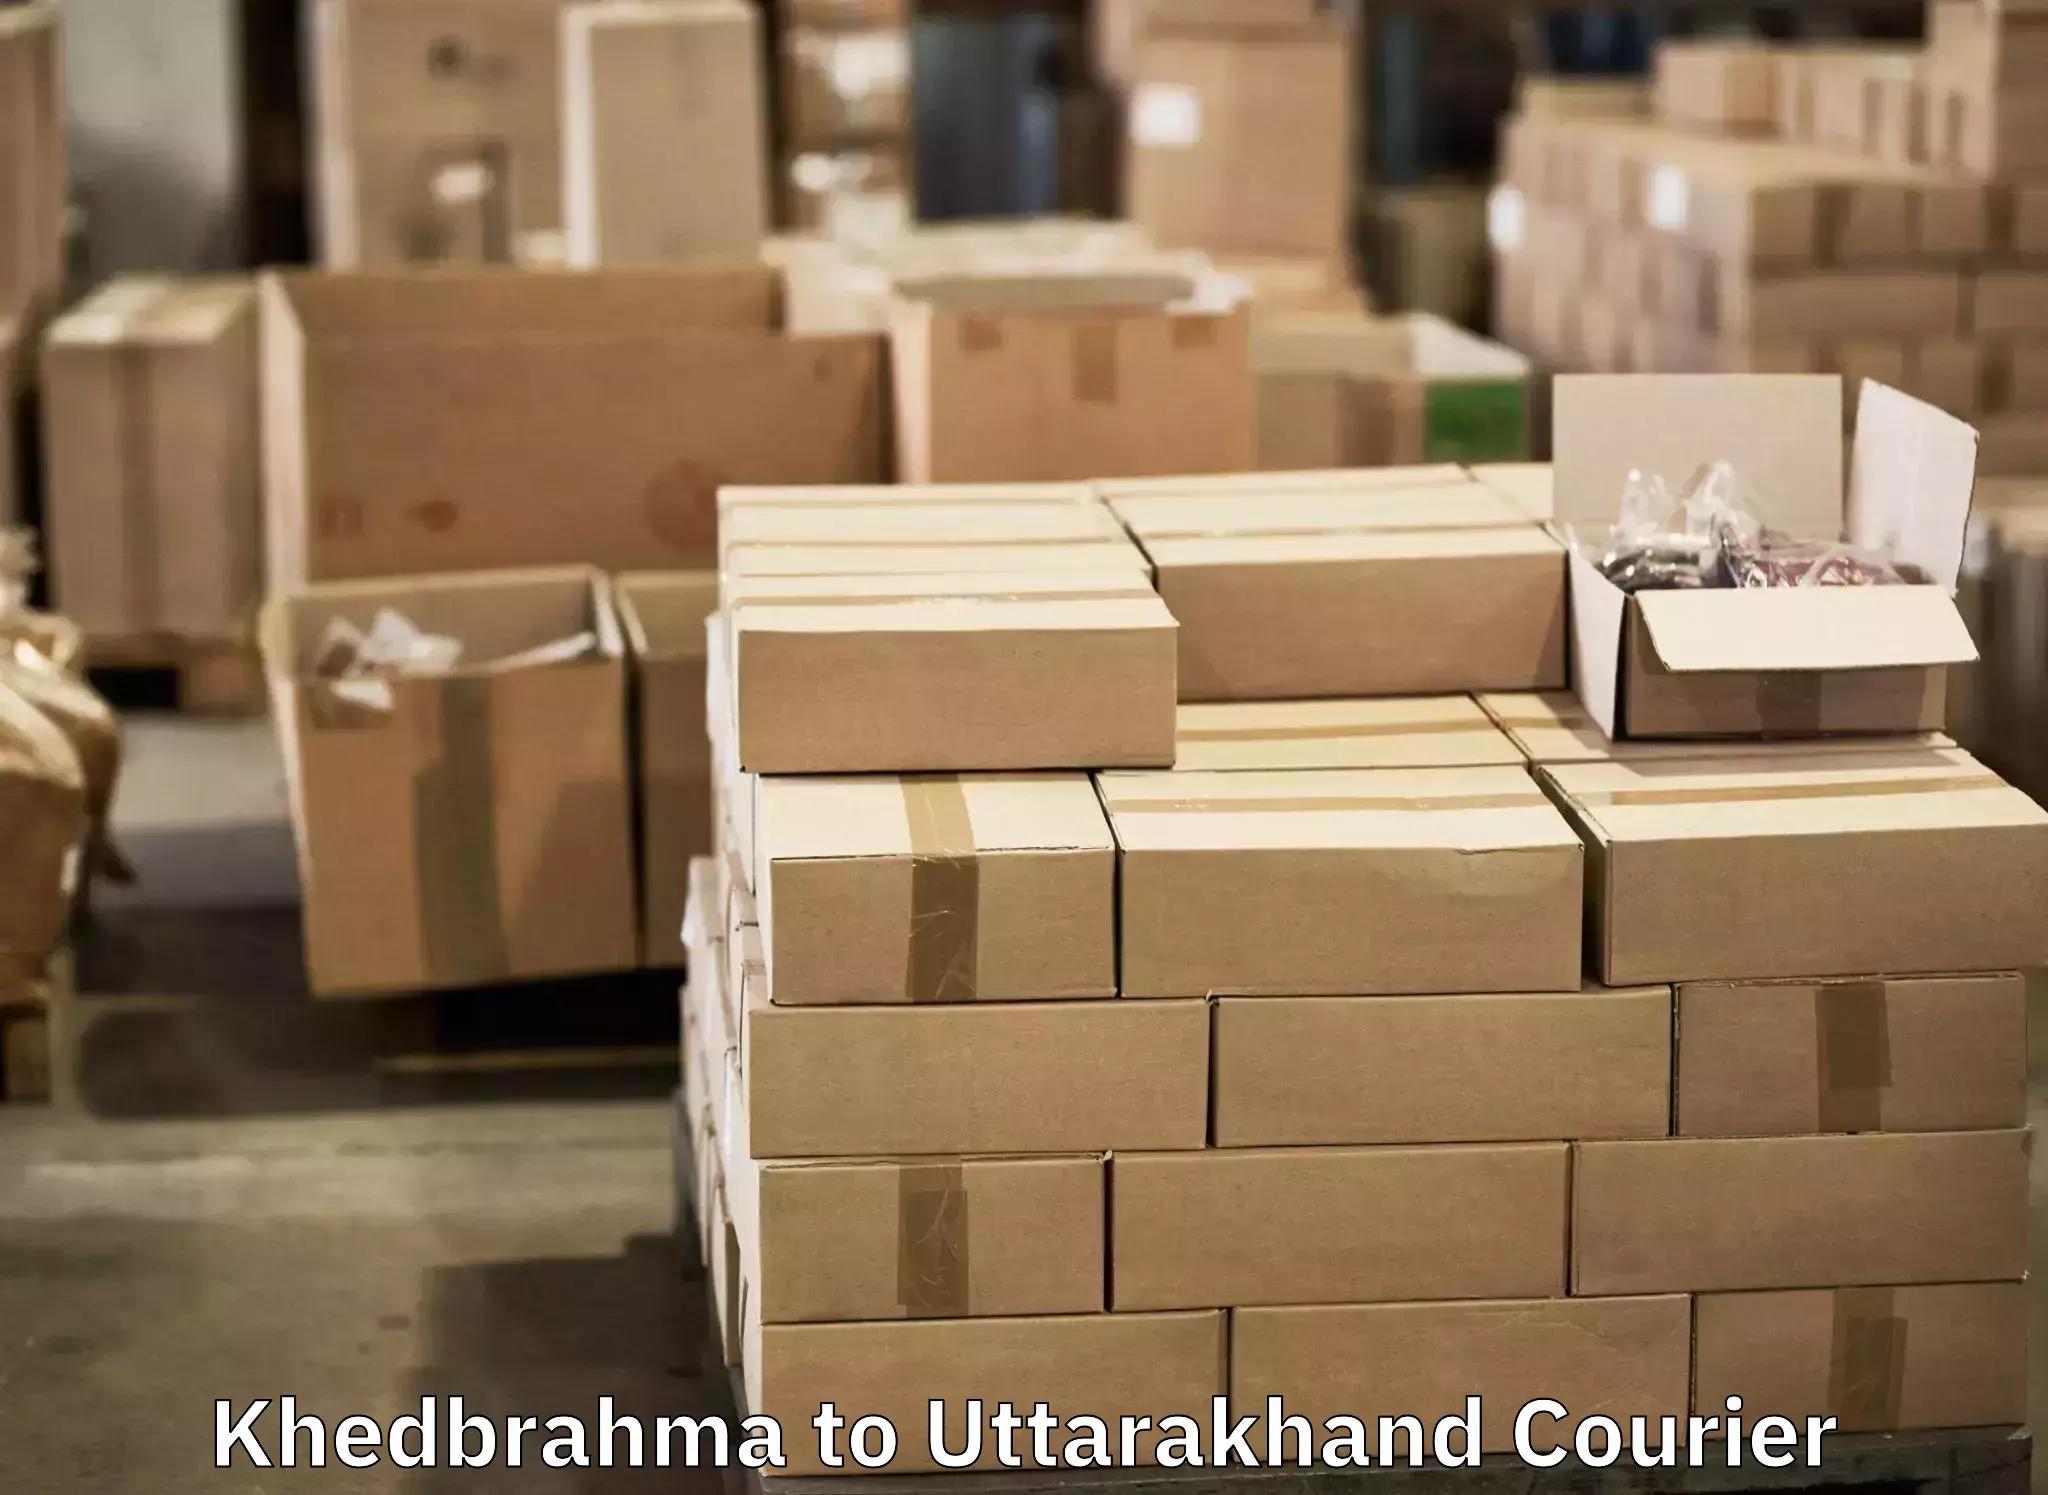 Luggage storage and delivery in Khedbrahma to Haridwar